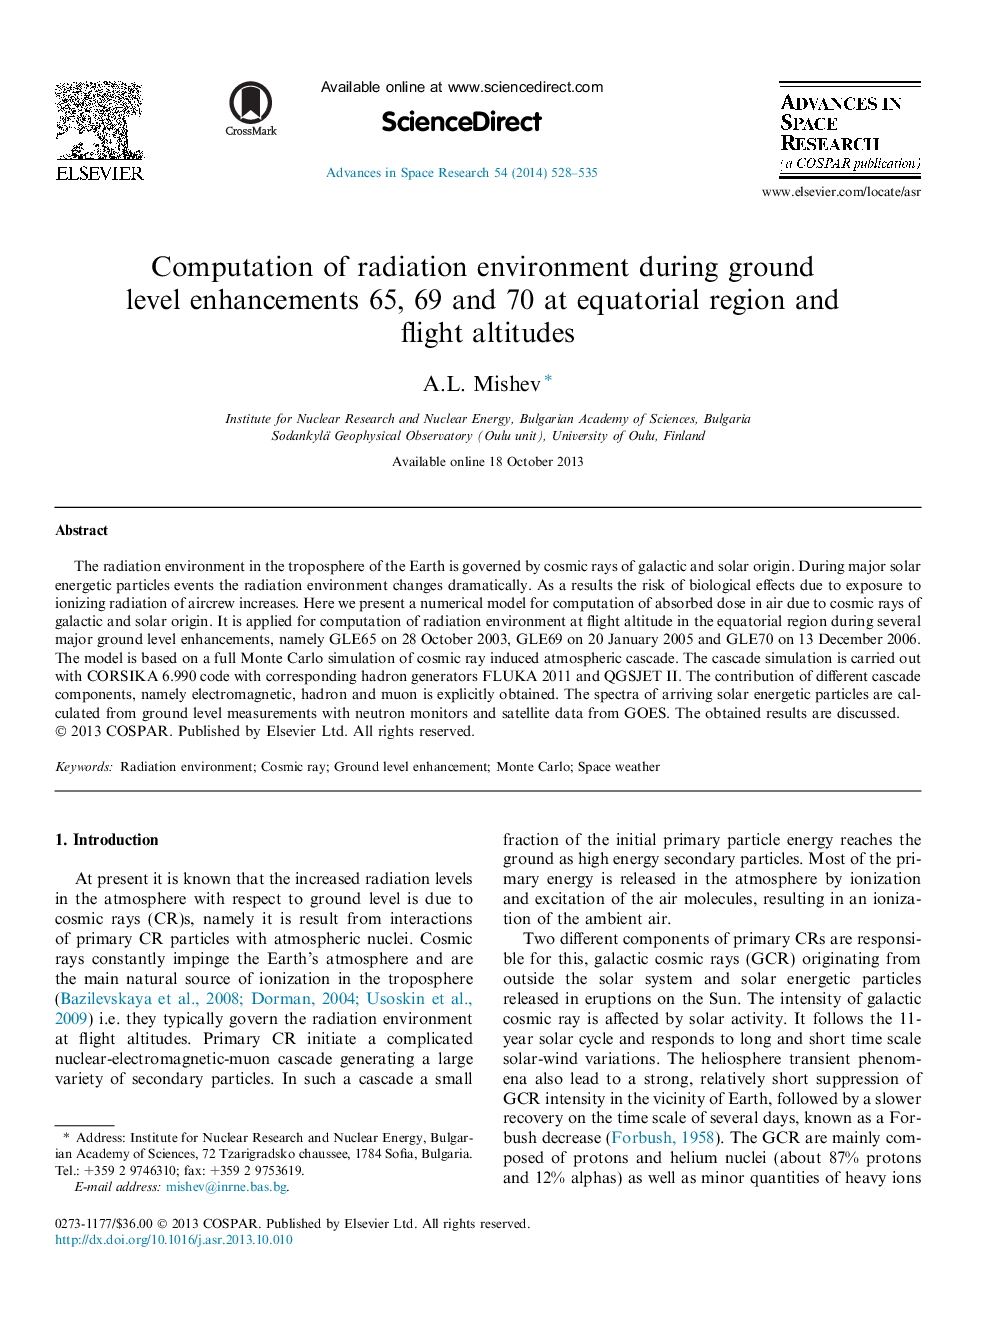 Computation of radiation environment during ground level enhancements 65, 69 and 70 at equatorial region and flight altitudes